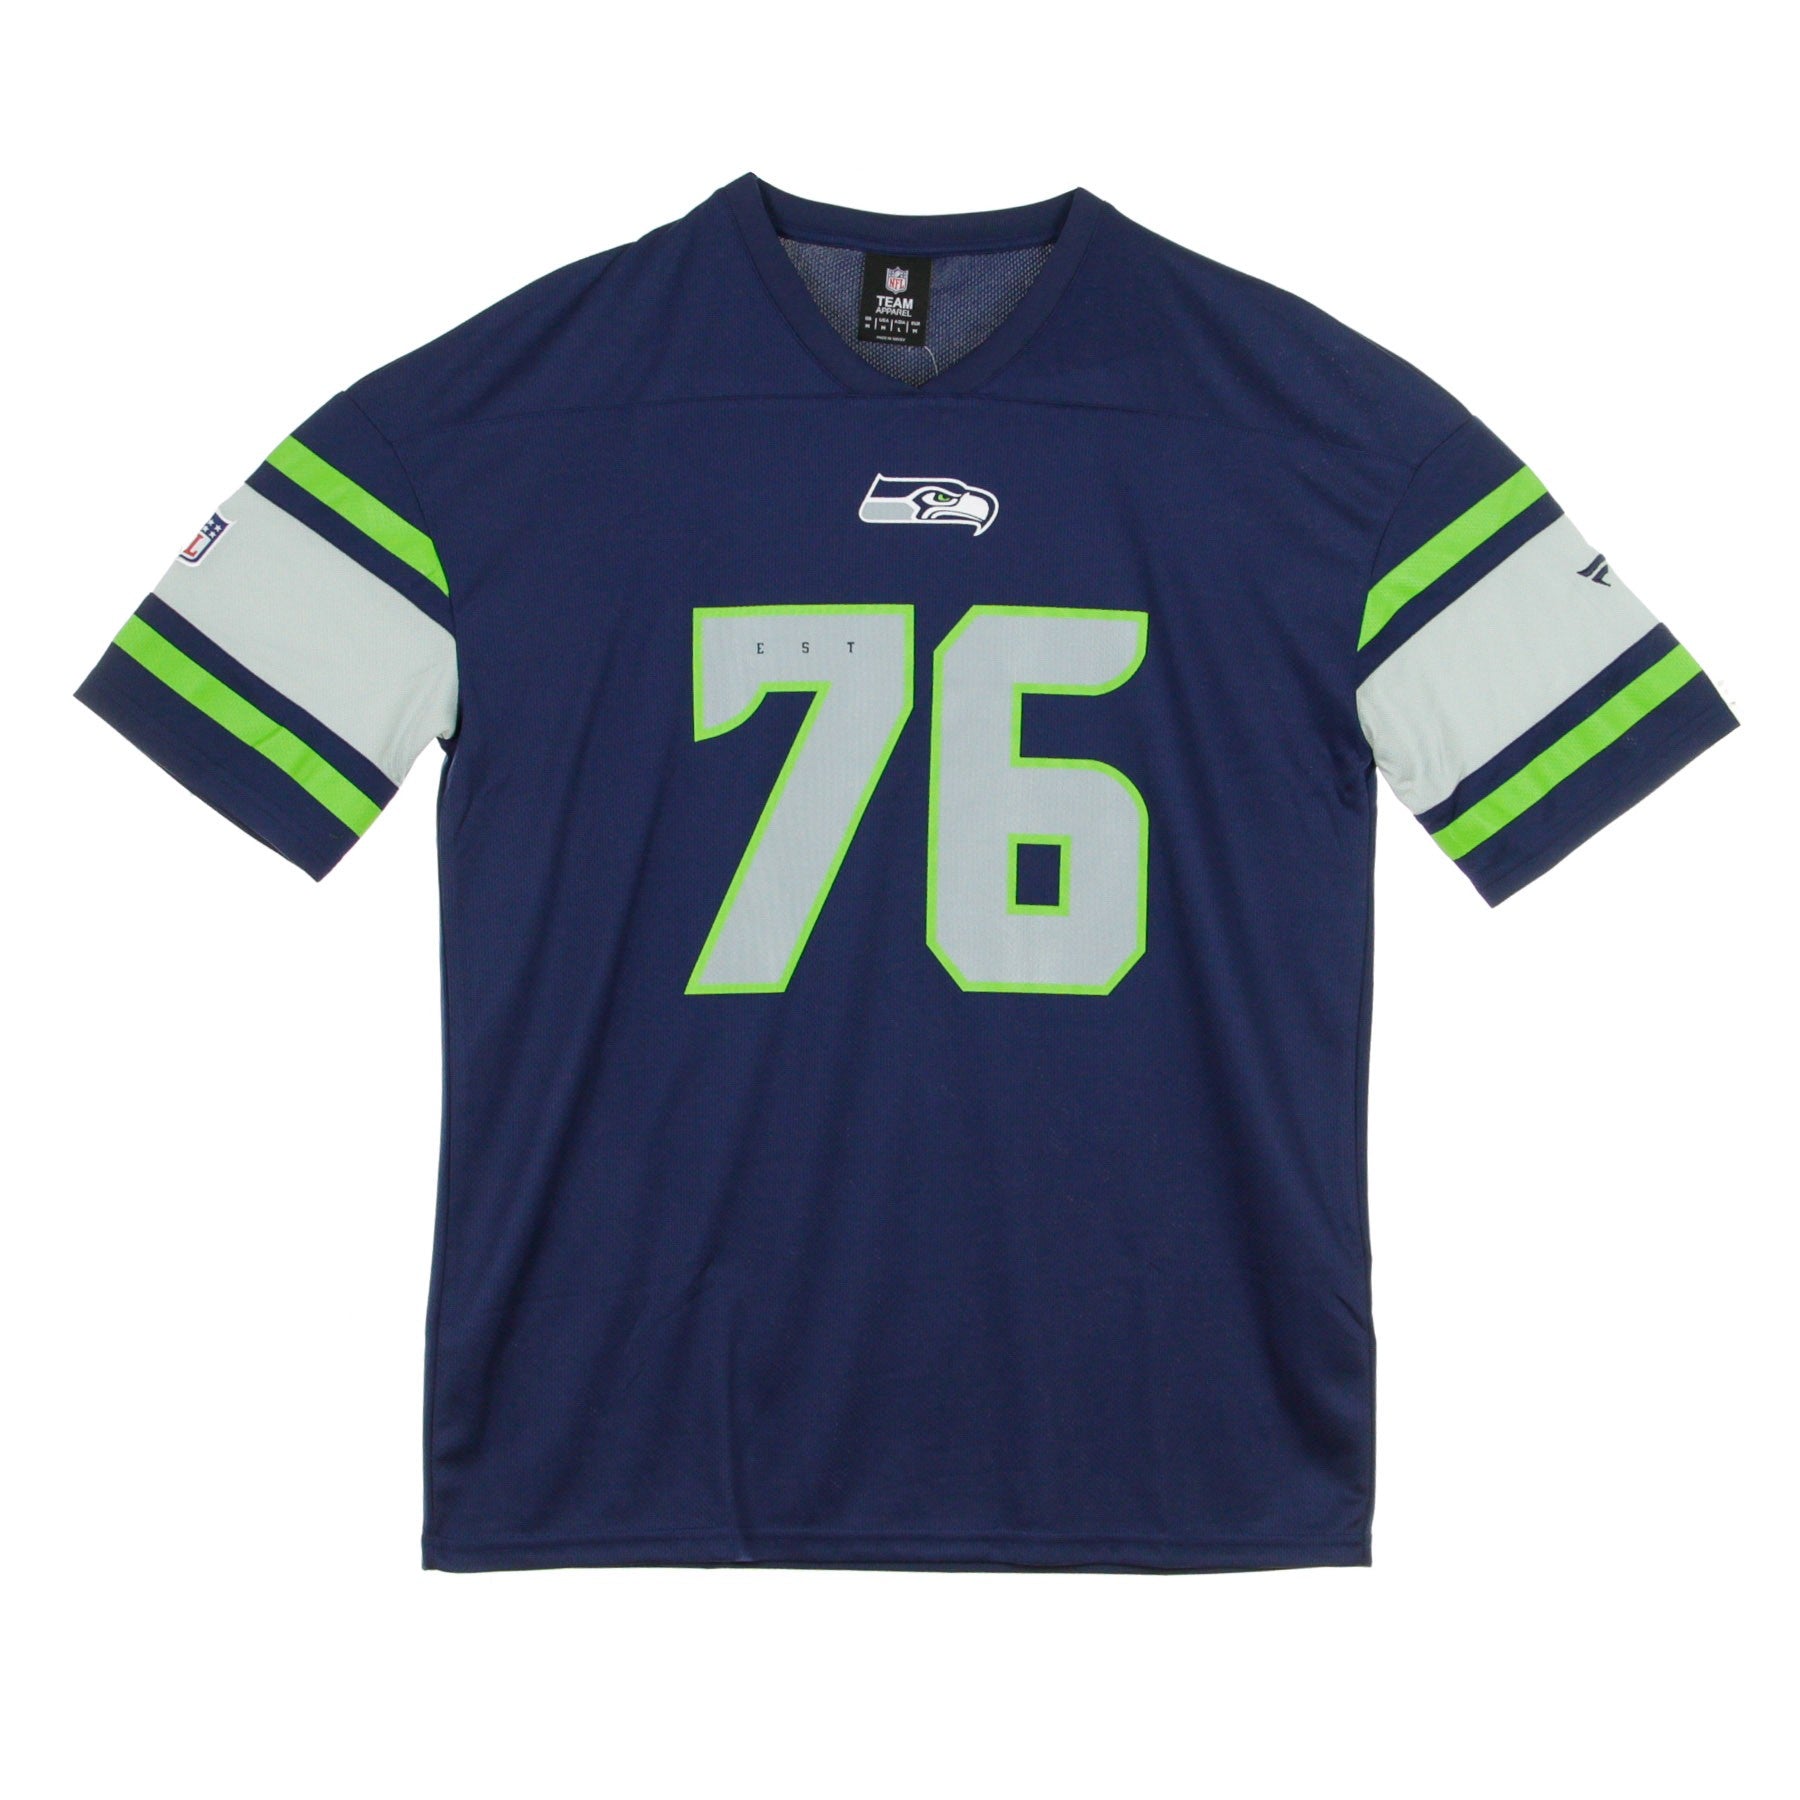 Men's T-Shirt Nfl Iconic Franchise Poly Mesh Supporters Jersey Seasea